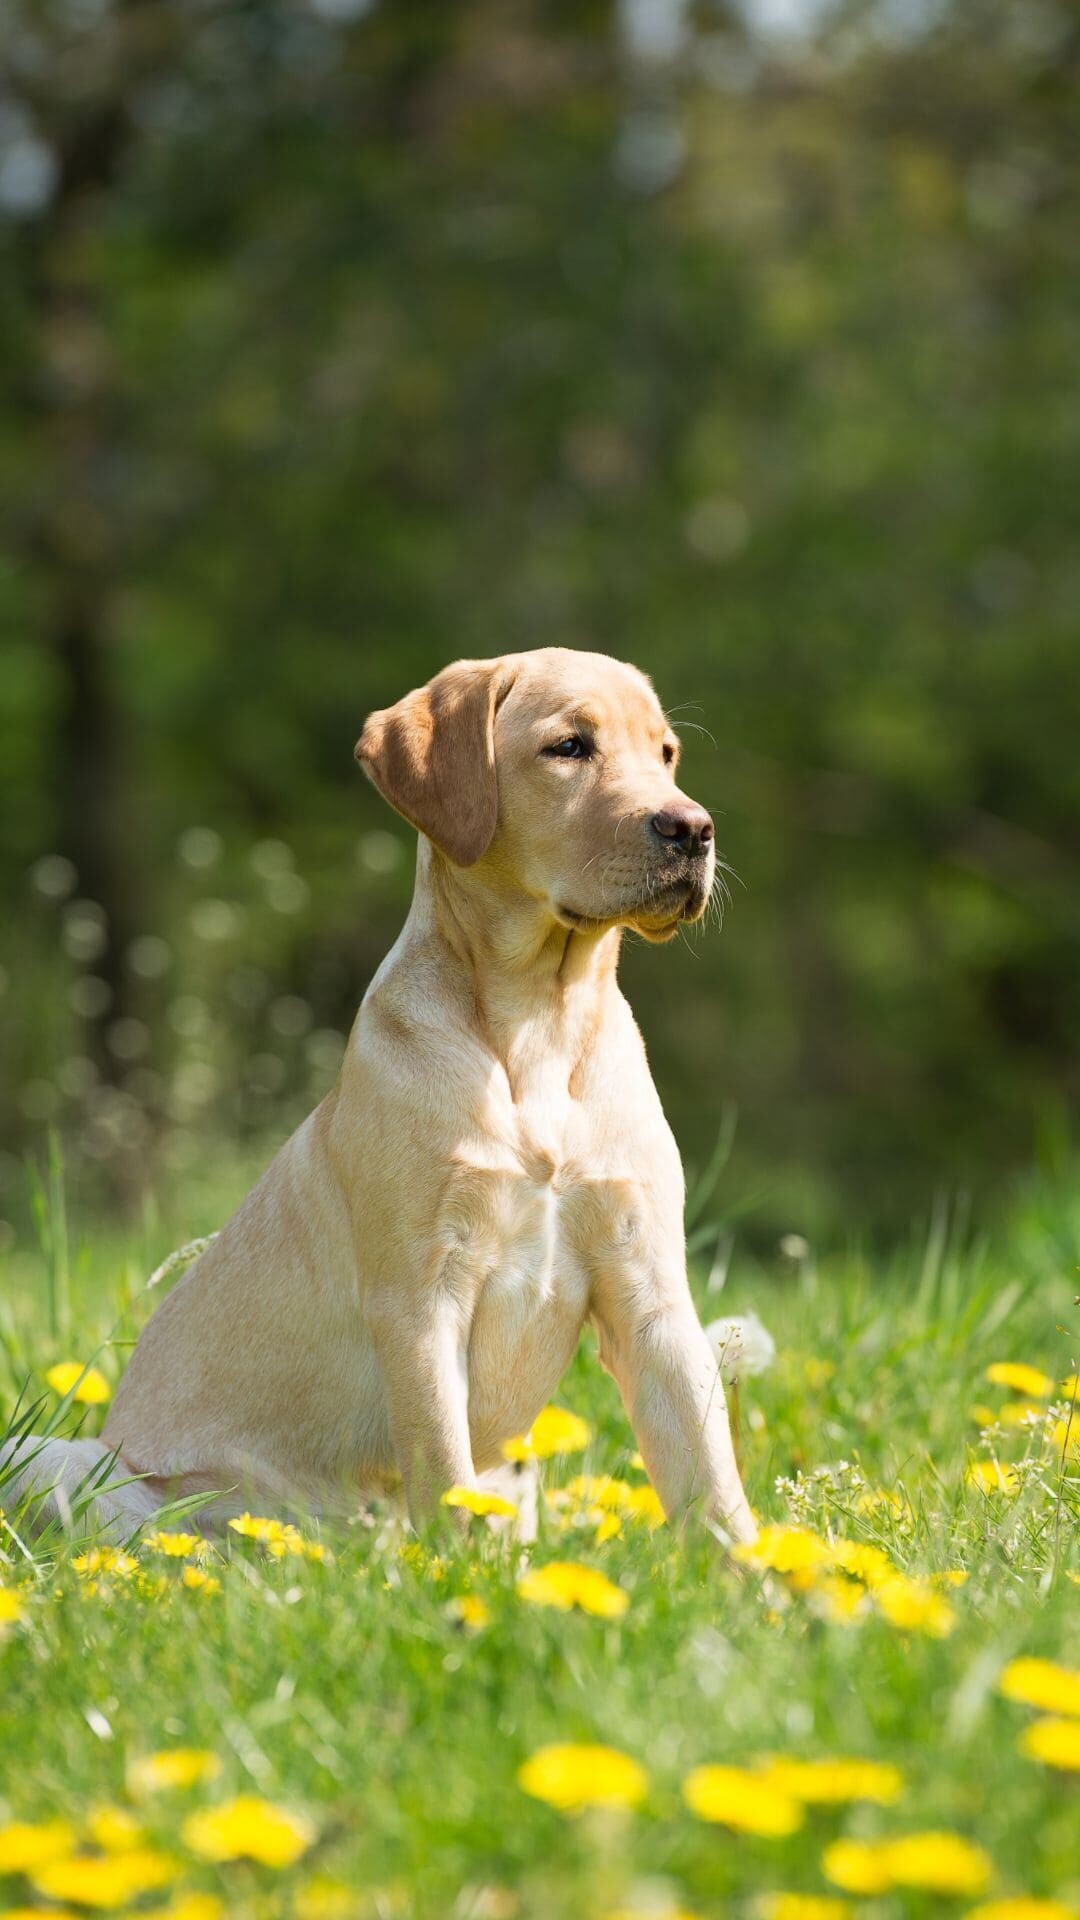 Labrador Retriever: The breed rank fourth on the canine intelligence testing scale. 1080x1920 Full HD Background.